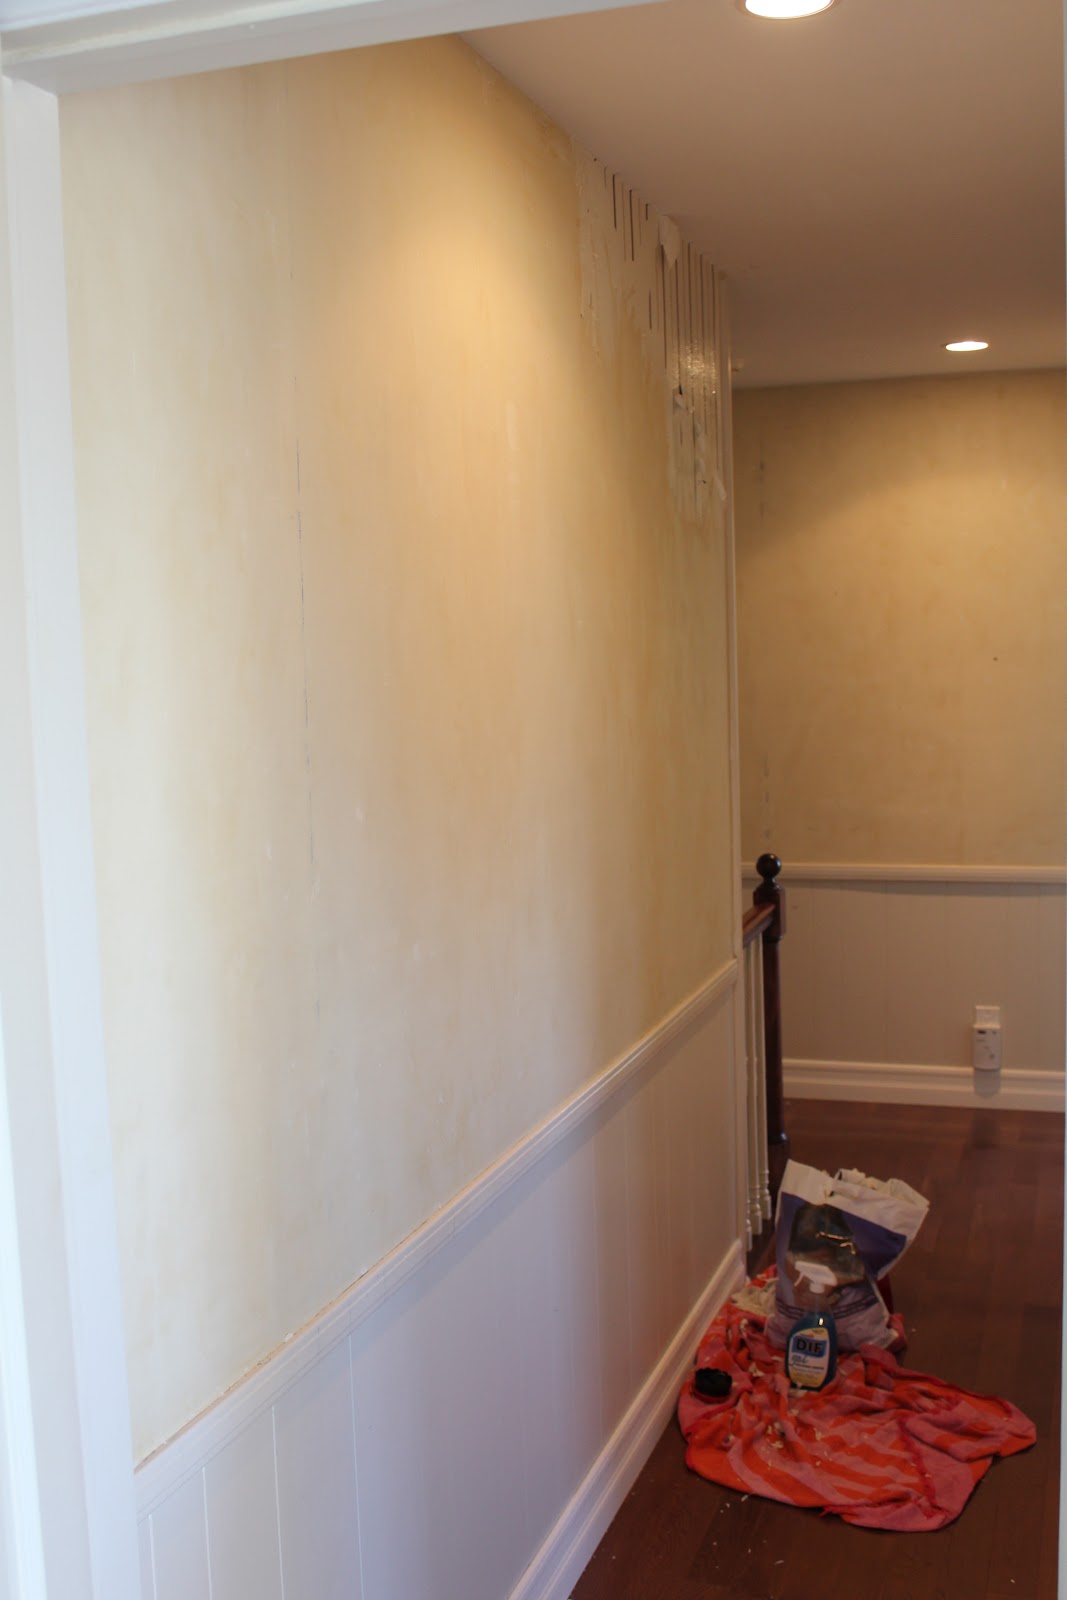 wallpaper and wainscoting wallpaper and wainscoting over the last